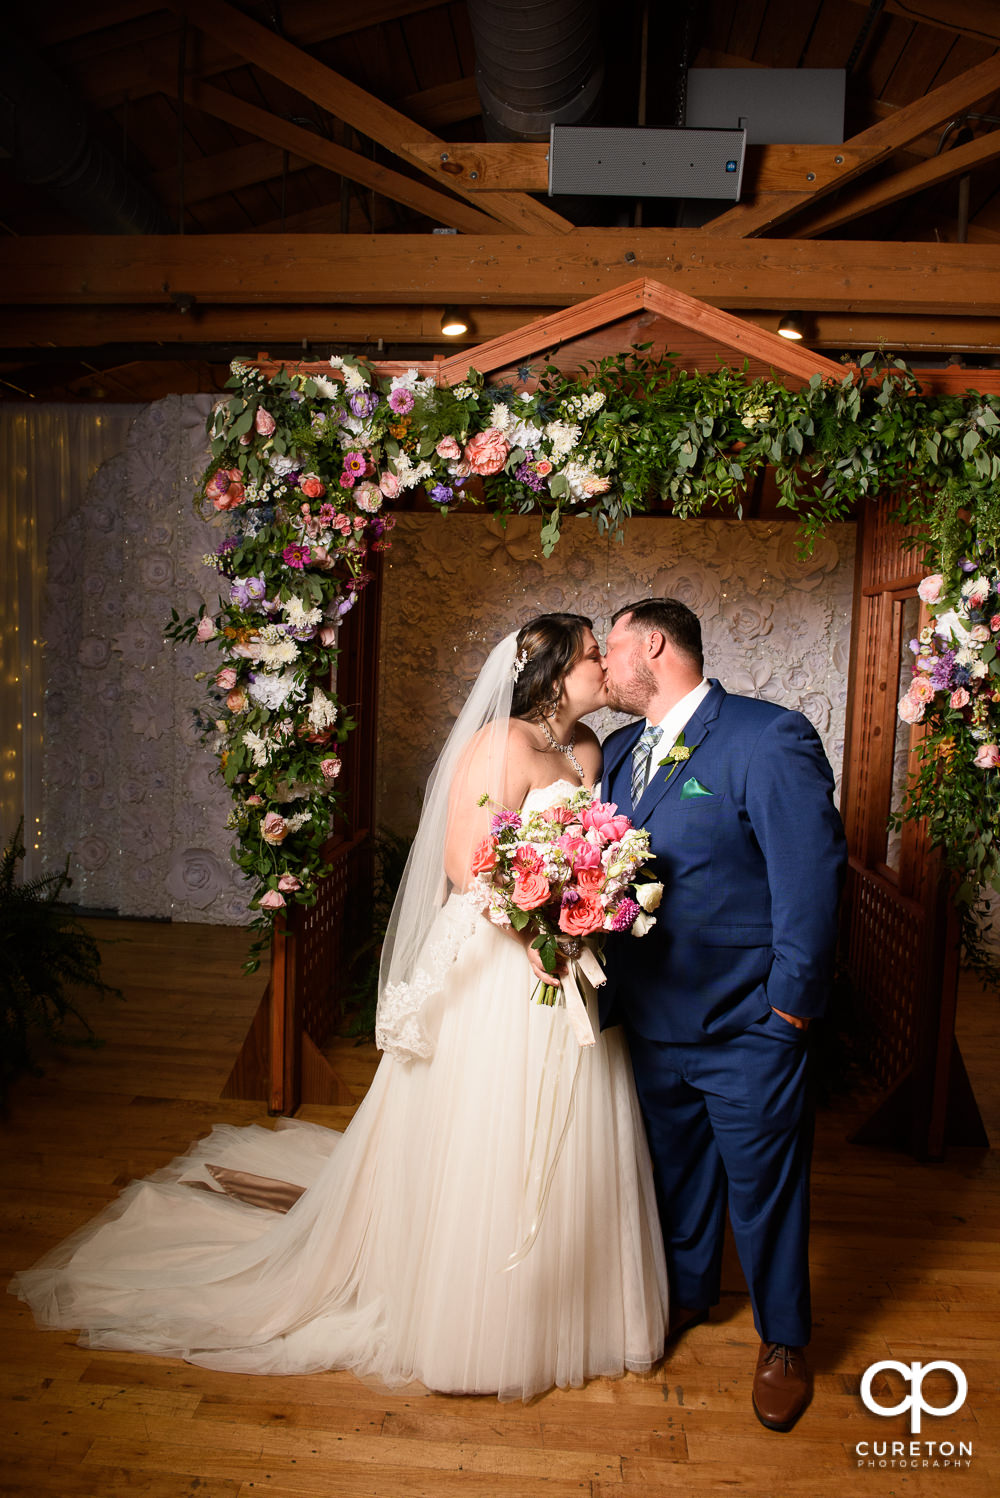 Bride and groom kissing under the arbor at their Huguenot Loft wedding.